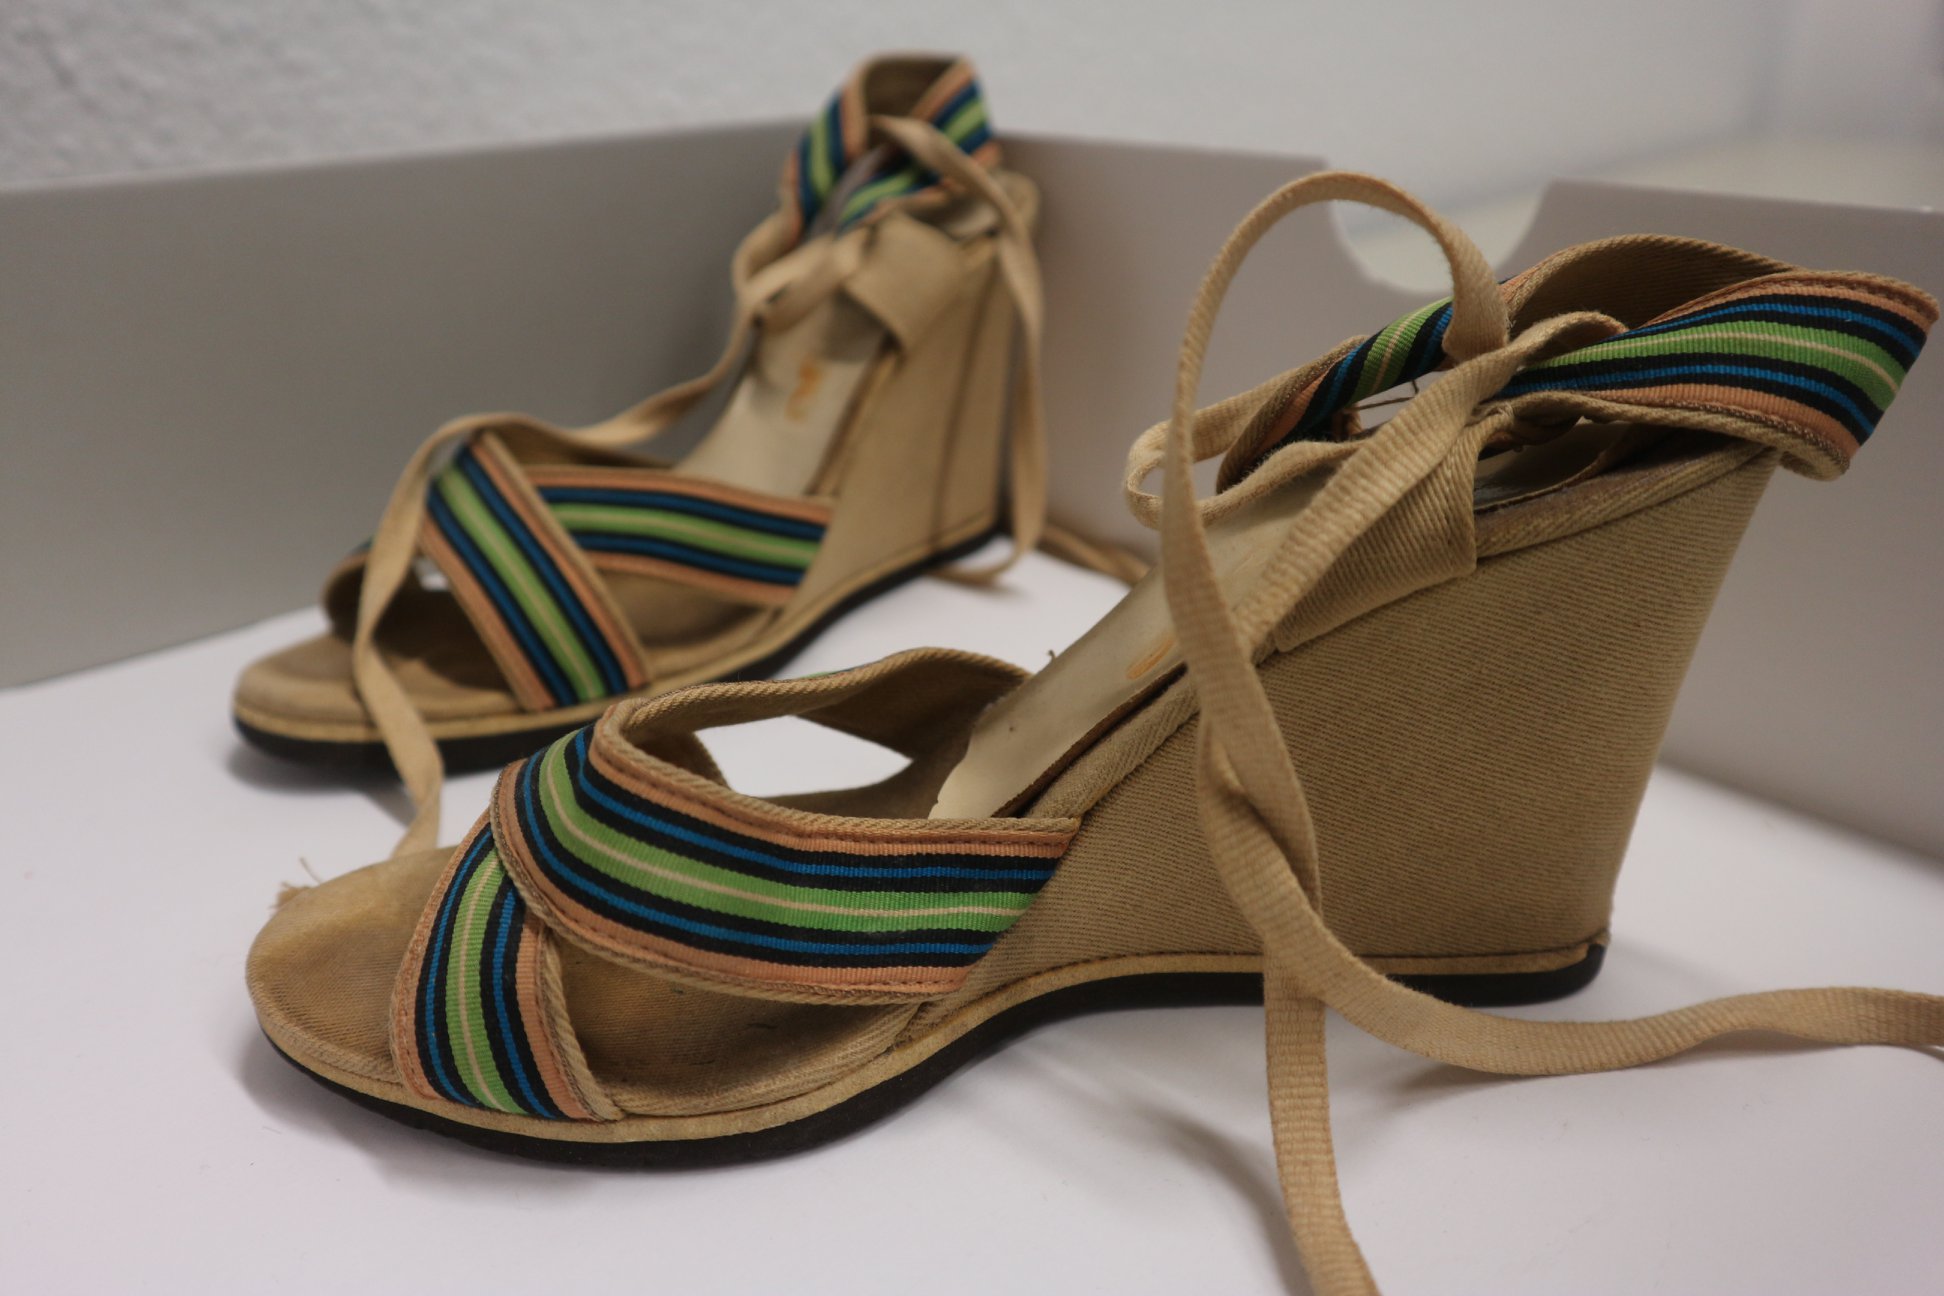 Shoes worn by Tina A., on her way from Ghana to Germany,  c. 1980. Foto: DOMiD-Archive, Köln